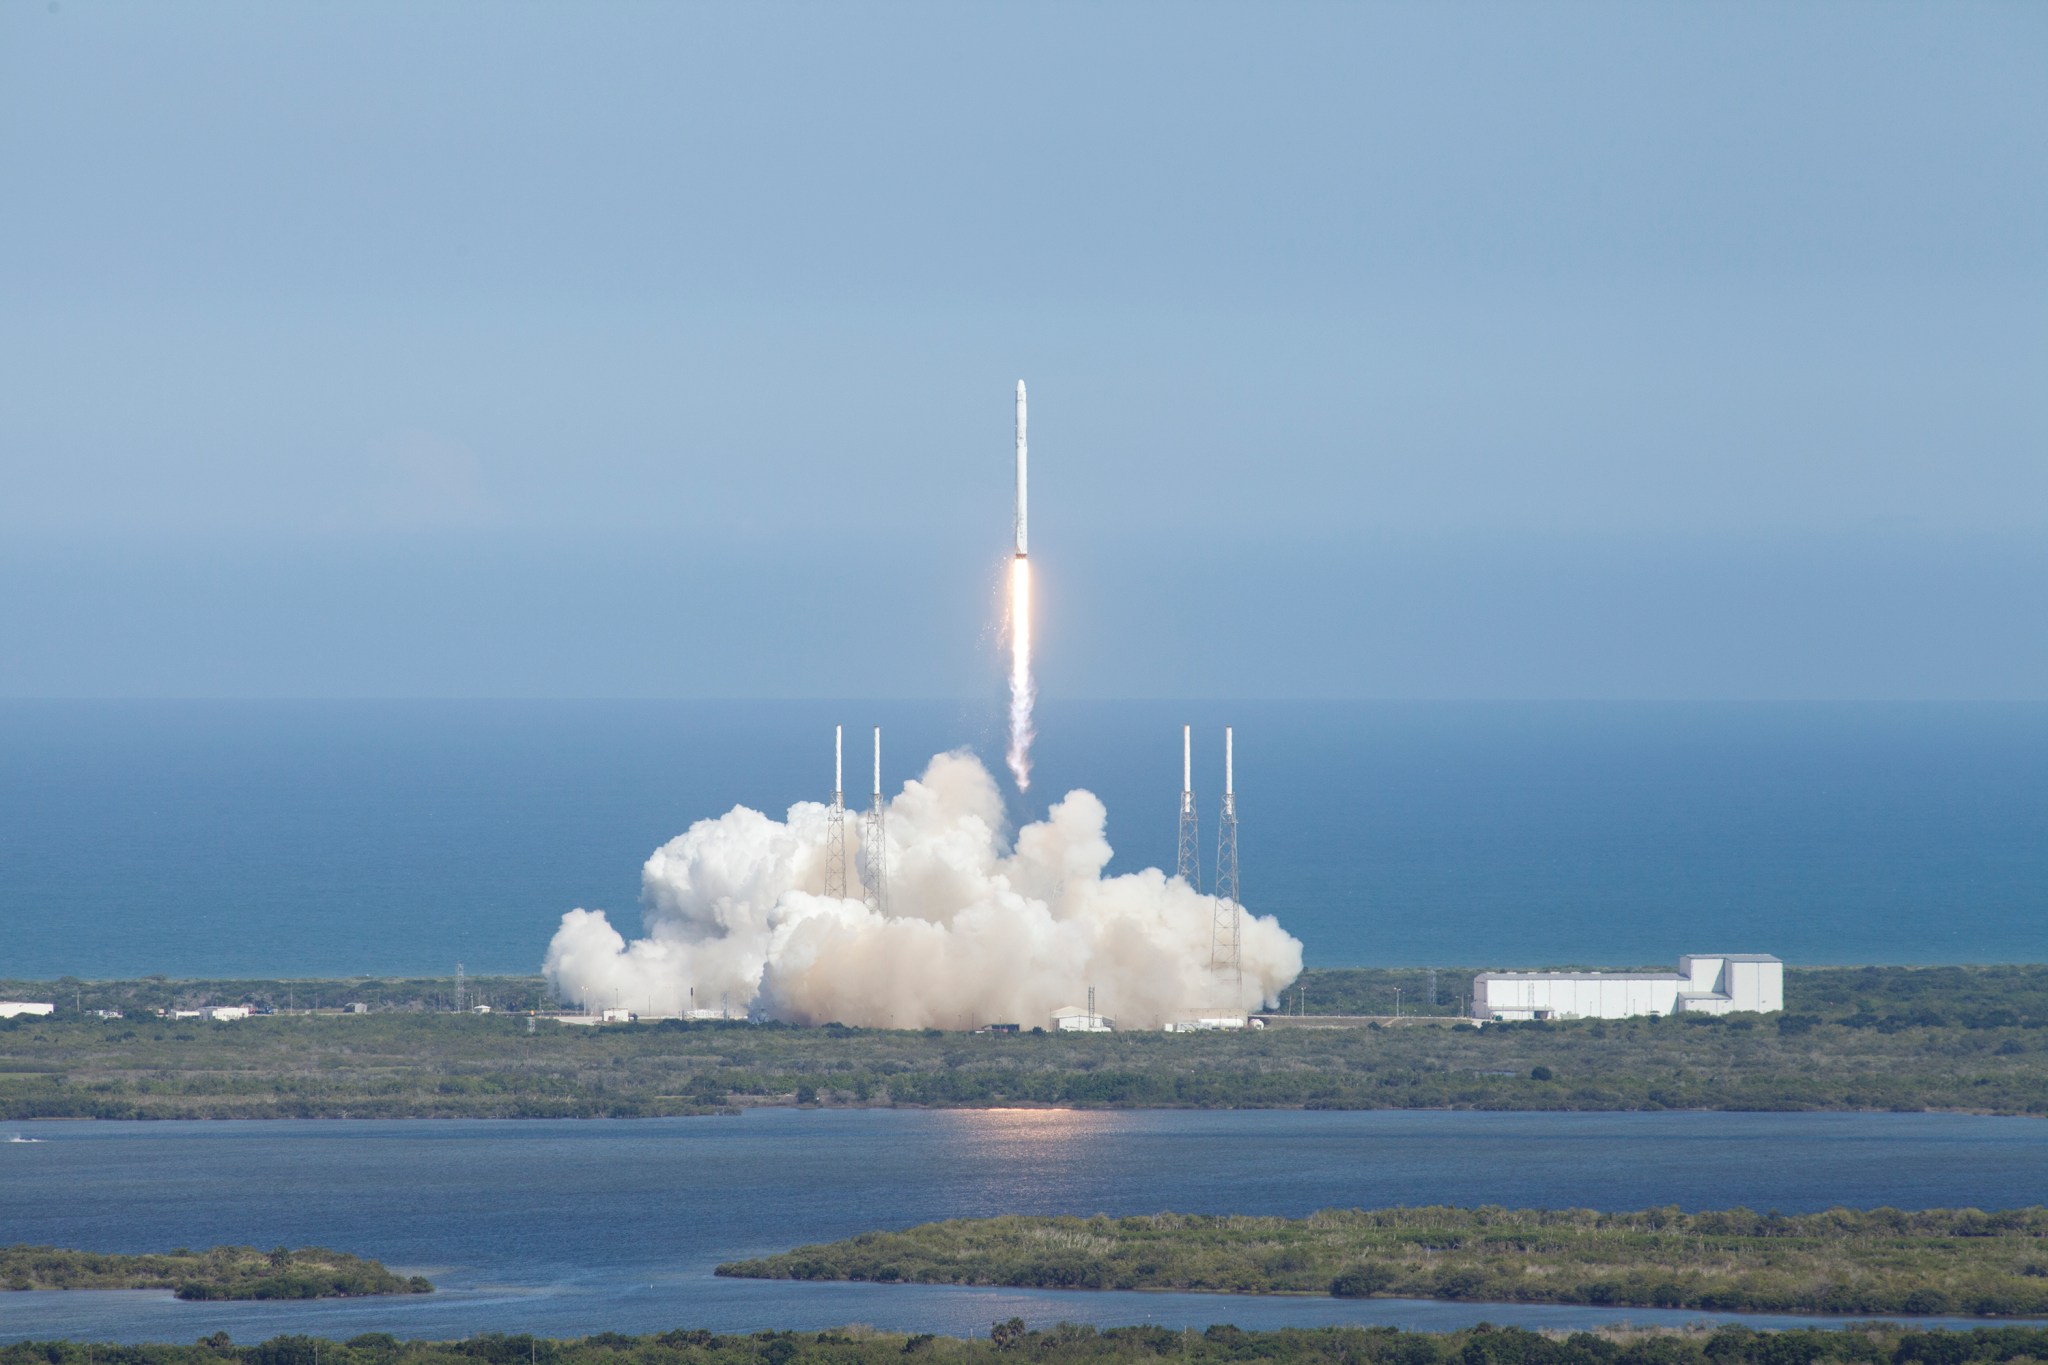 SpaceX Falcon 9 rocket lifts off from Space Launch Complex 40 at Cape Canaveral Air Force Station